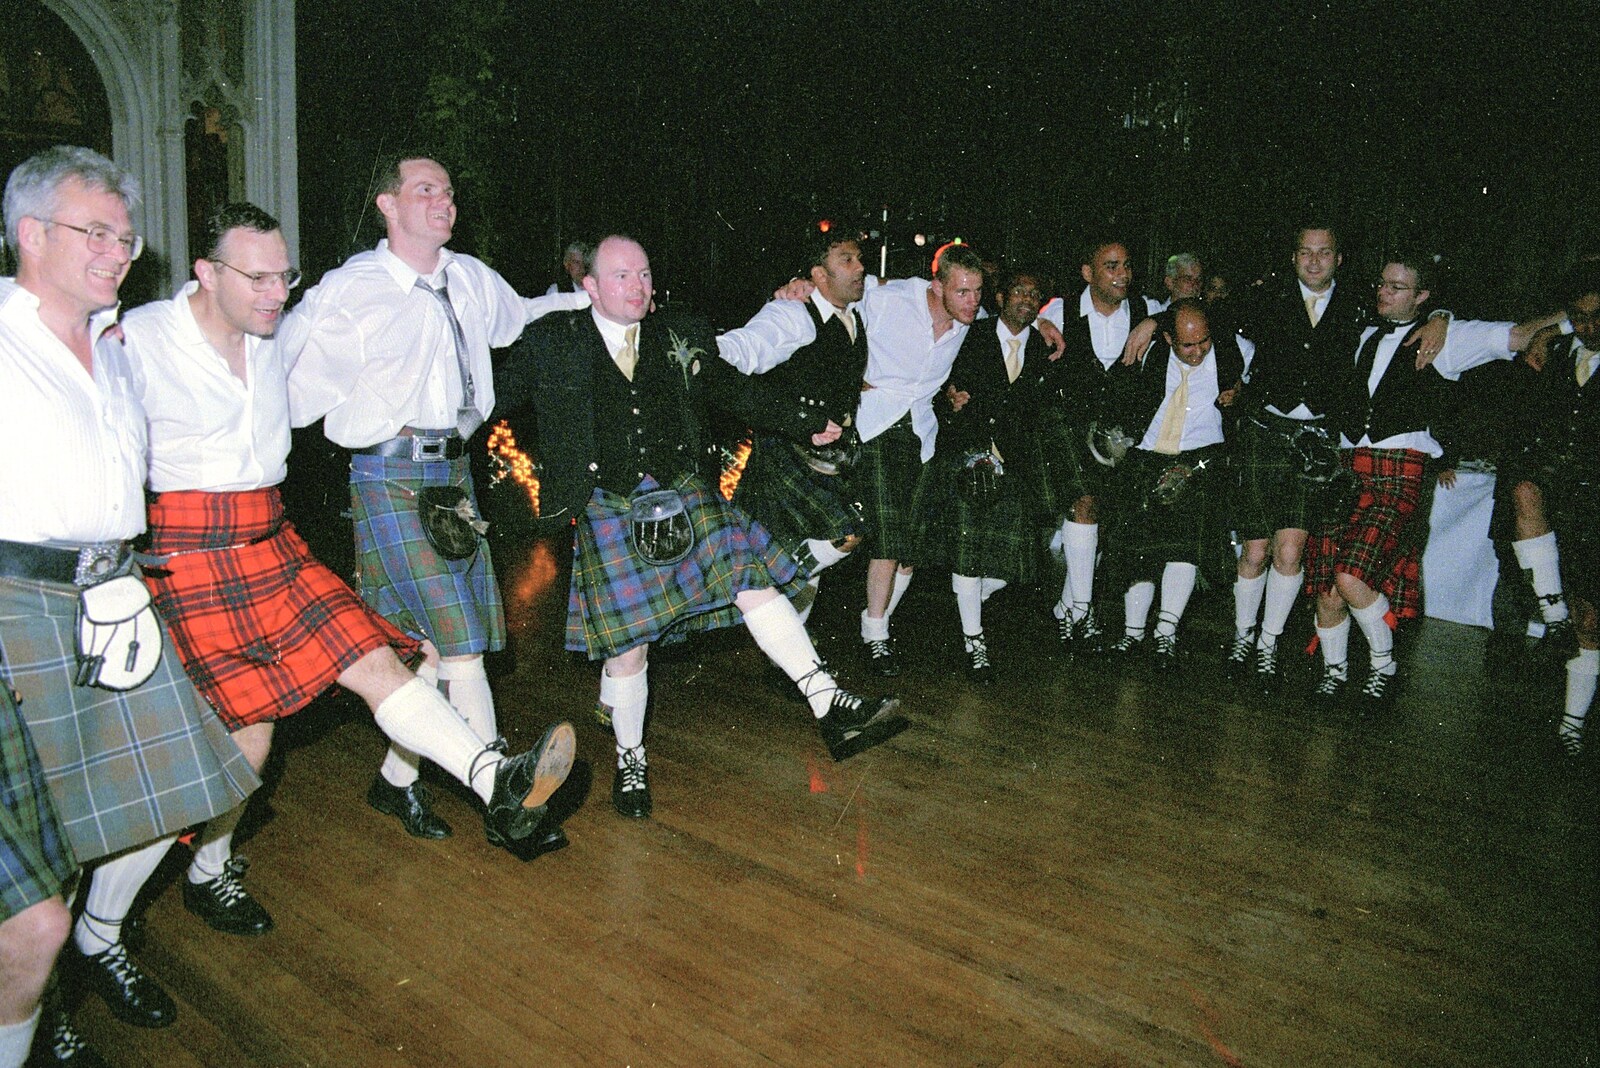 Hamish and Jane's Wedding, Canford School, Wimborne, Dorset - 5th August 1998: Kilt-ish line can-can dancing